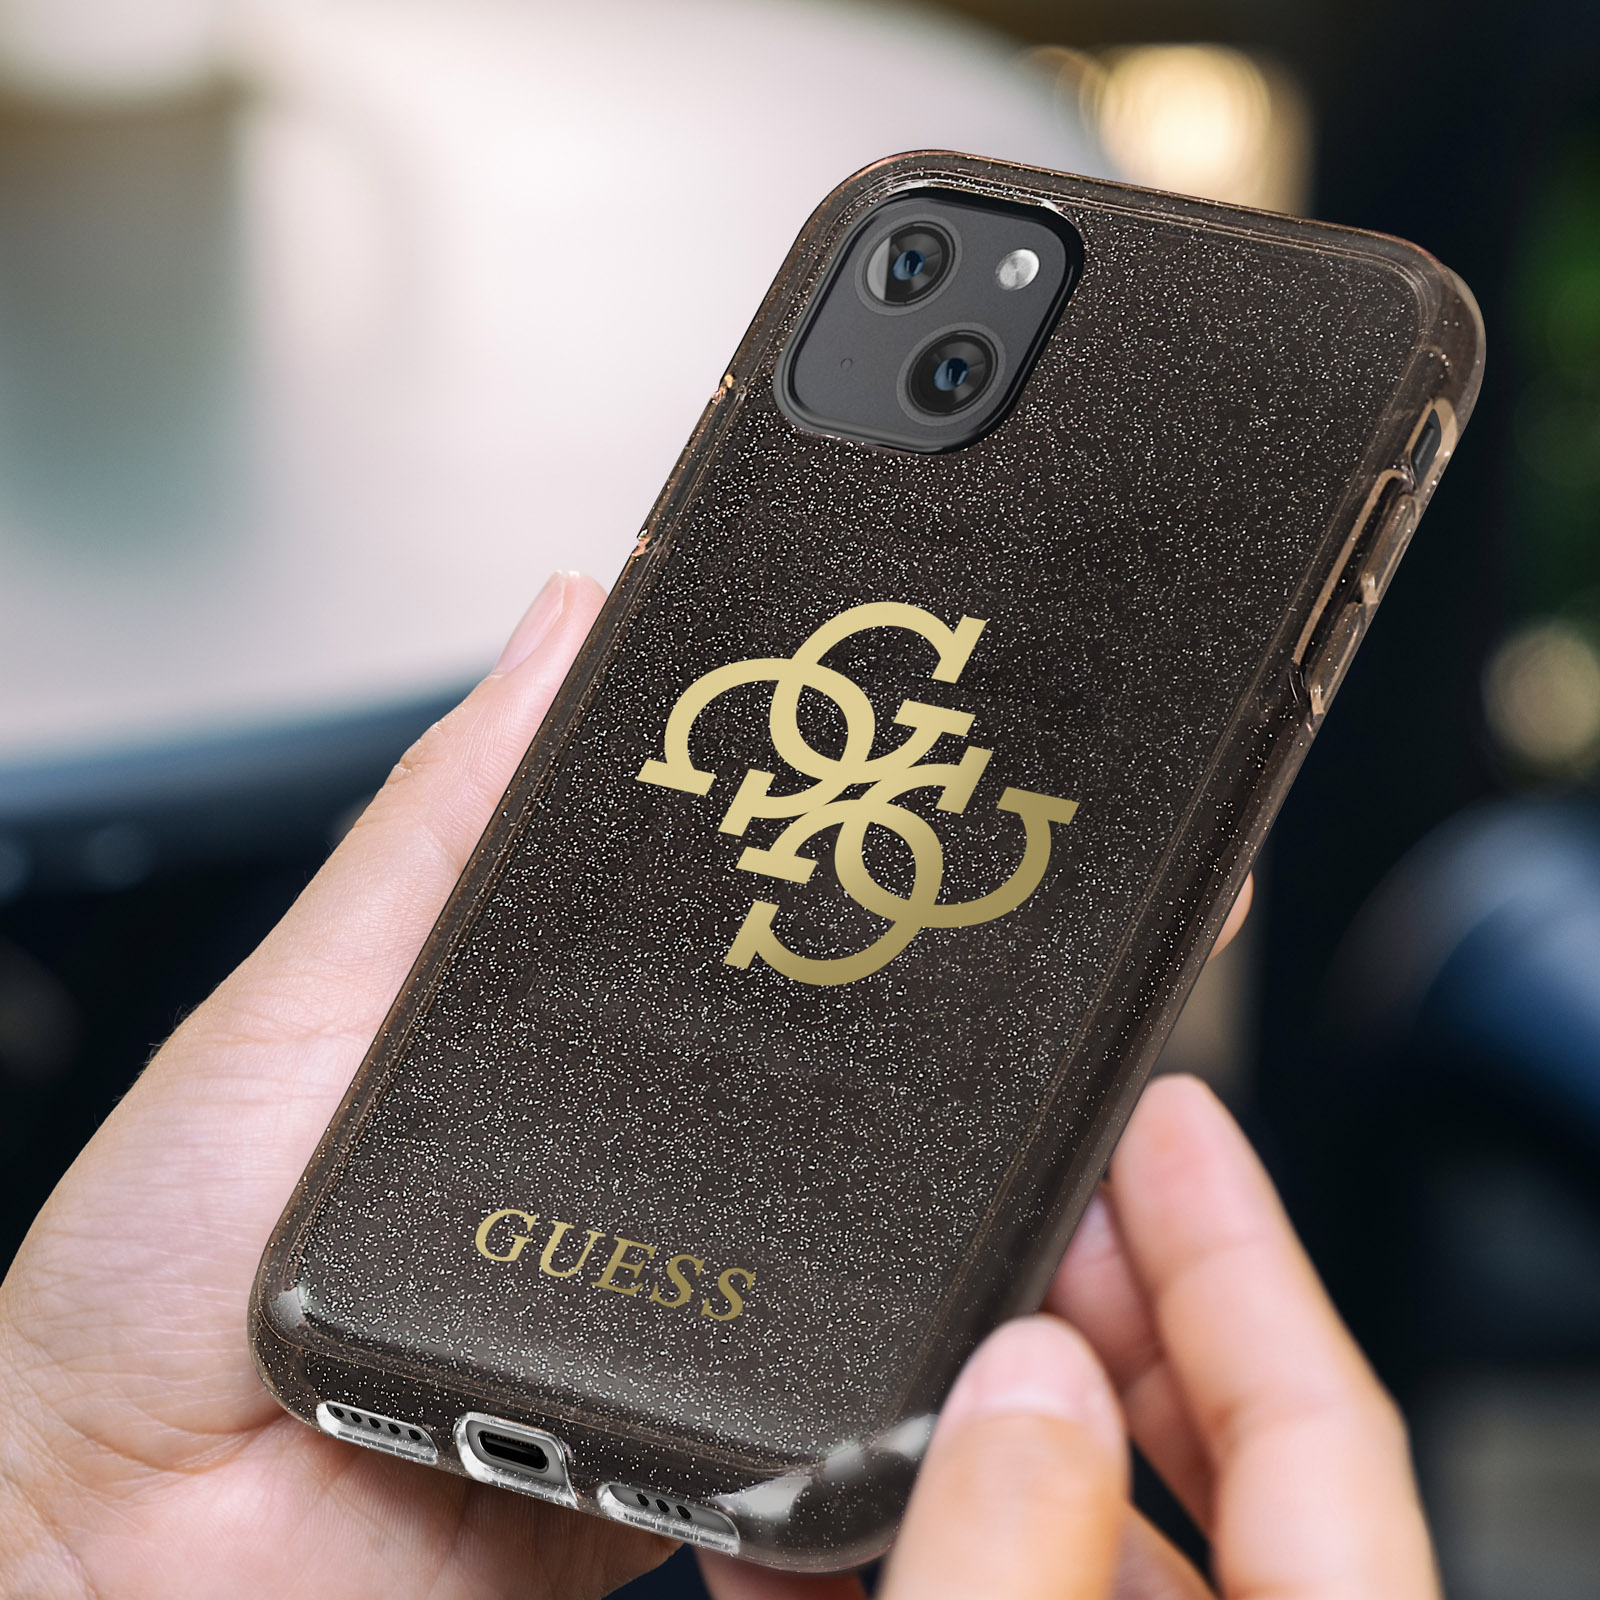 GUESS Glitter 4G Big Logo 13 mini iPhone for Case Angabe 13 Mini, Apple, Backcover, (Gold), Keine - iPhone